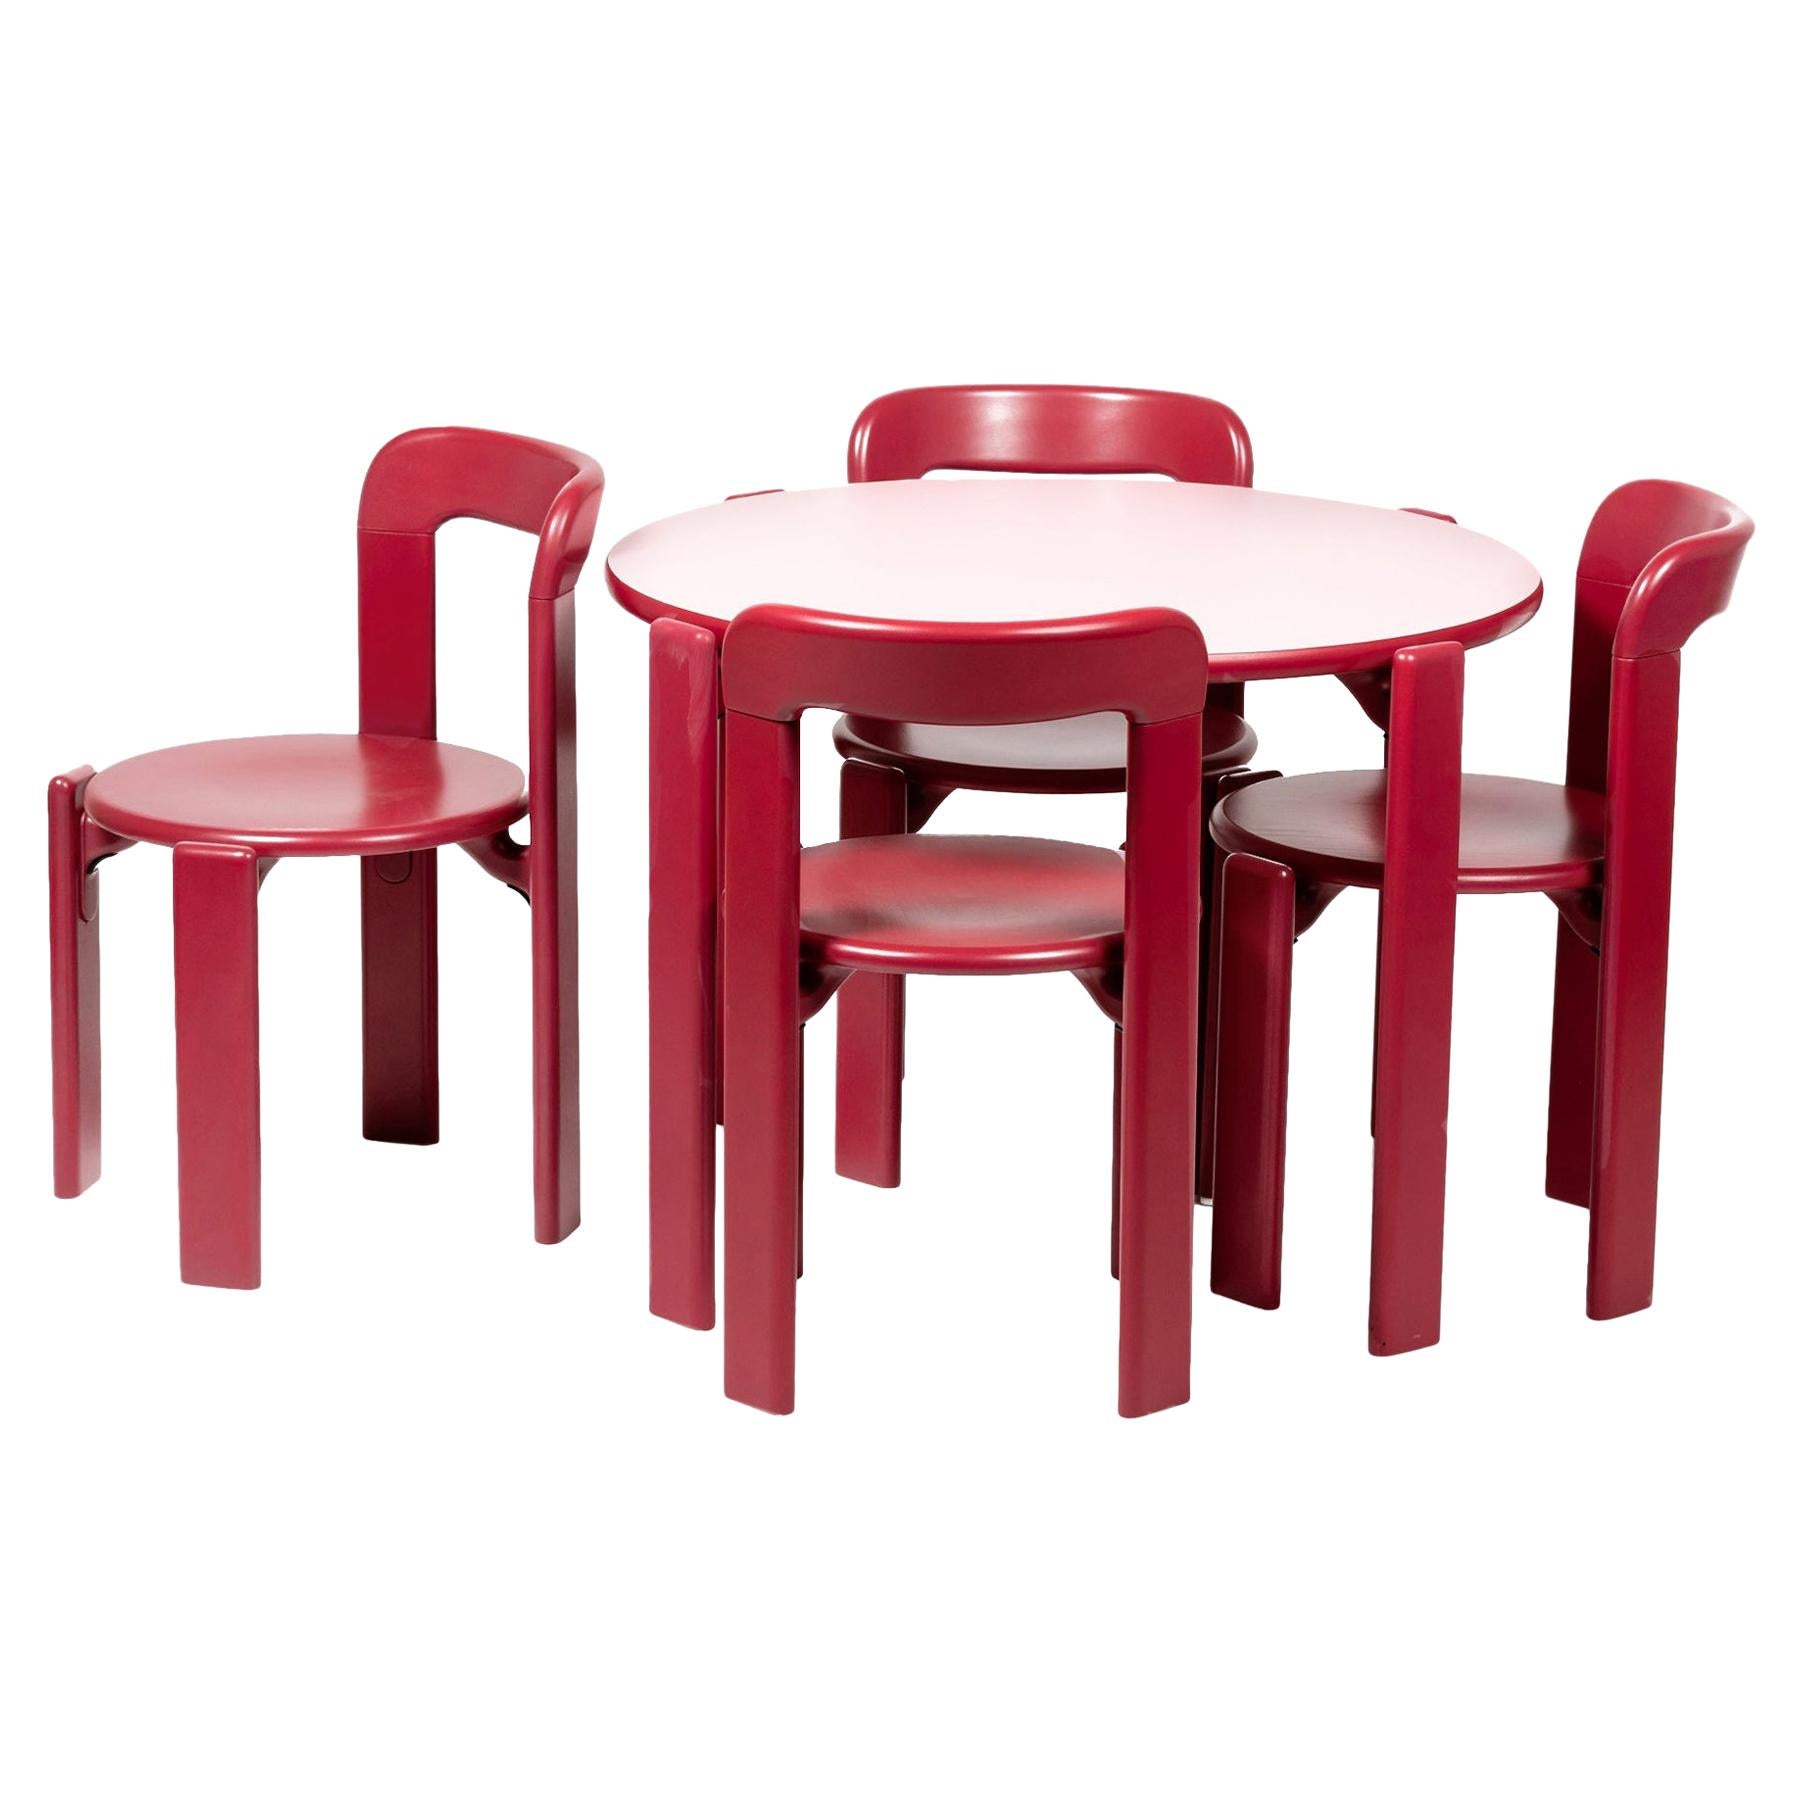 Rey Junior Set, Kids Table and Chairs in Candy, Designed by Bruno Rey, in Stock